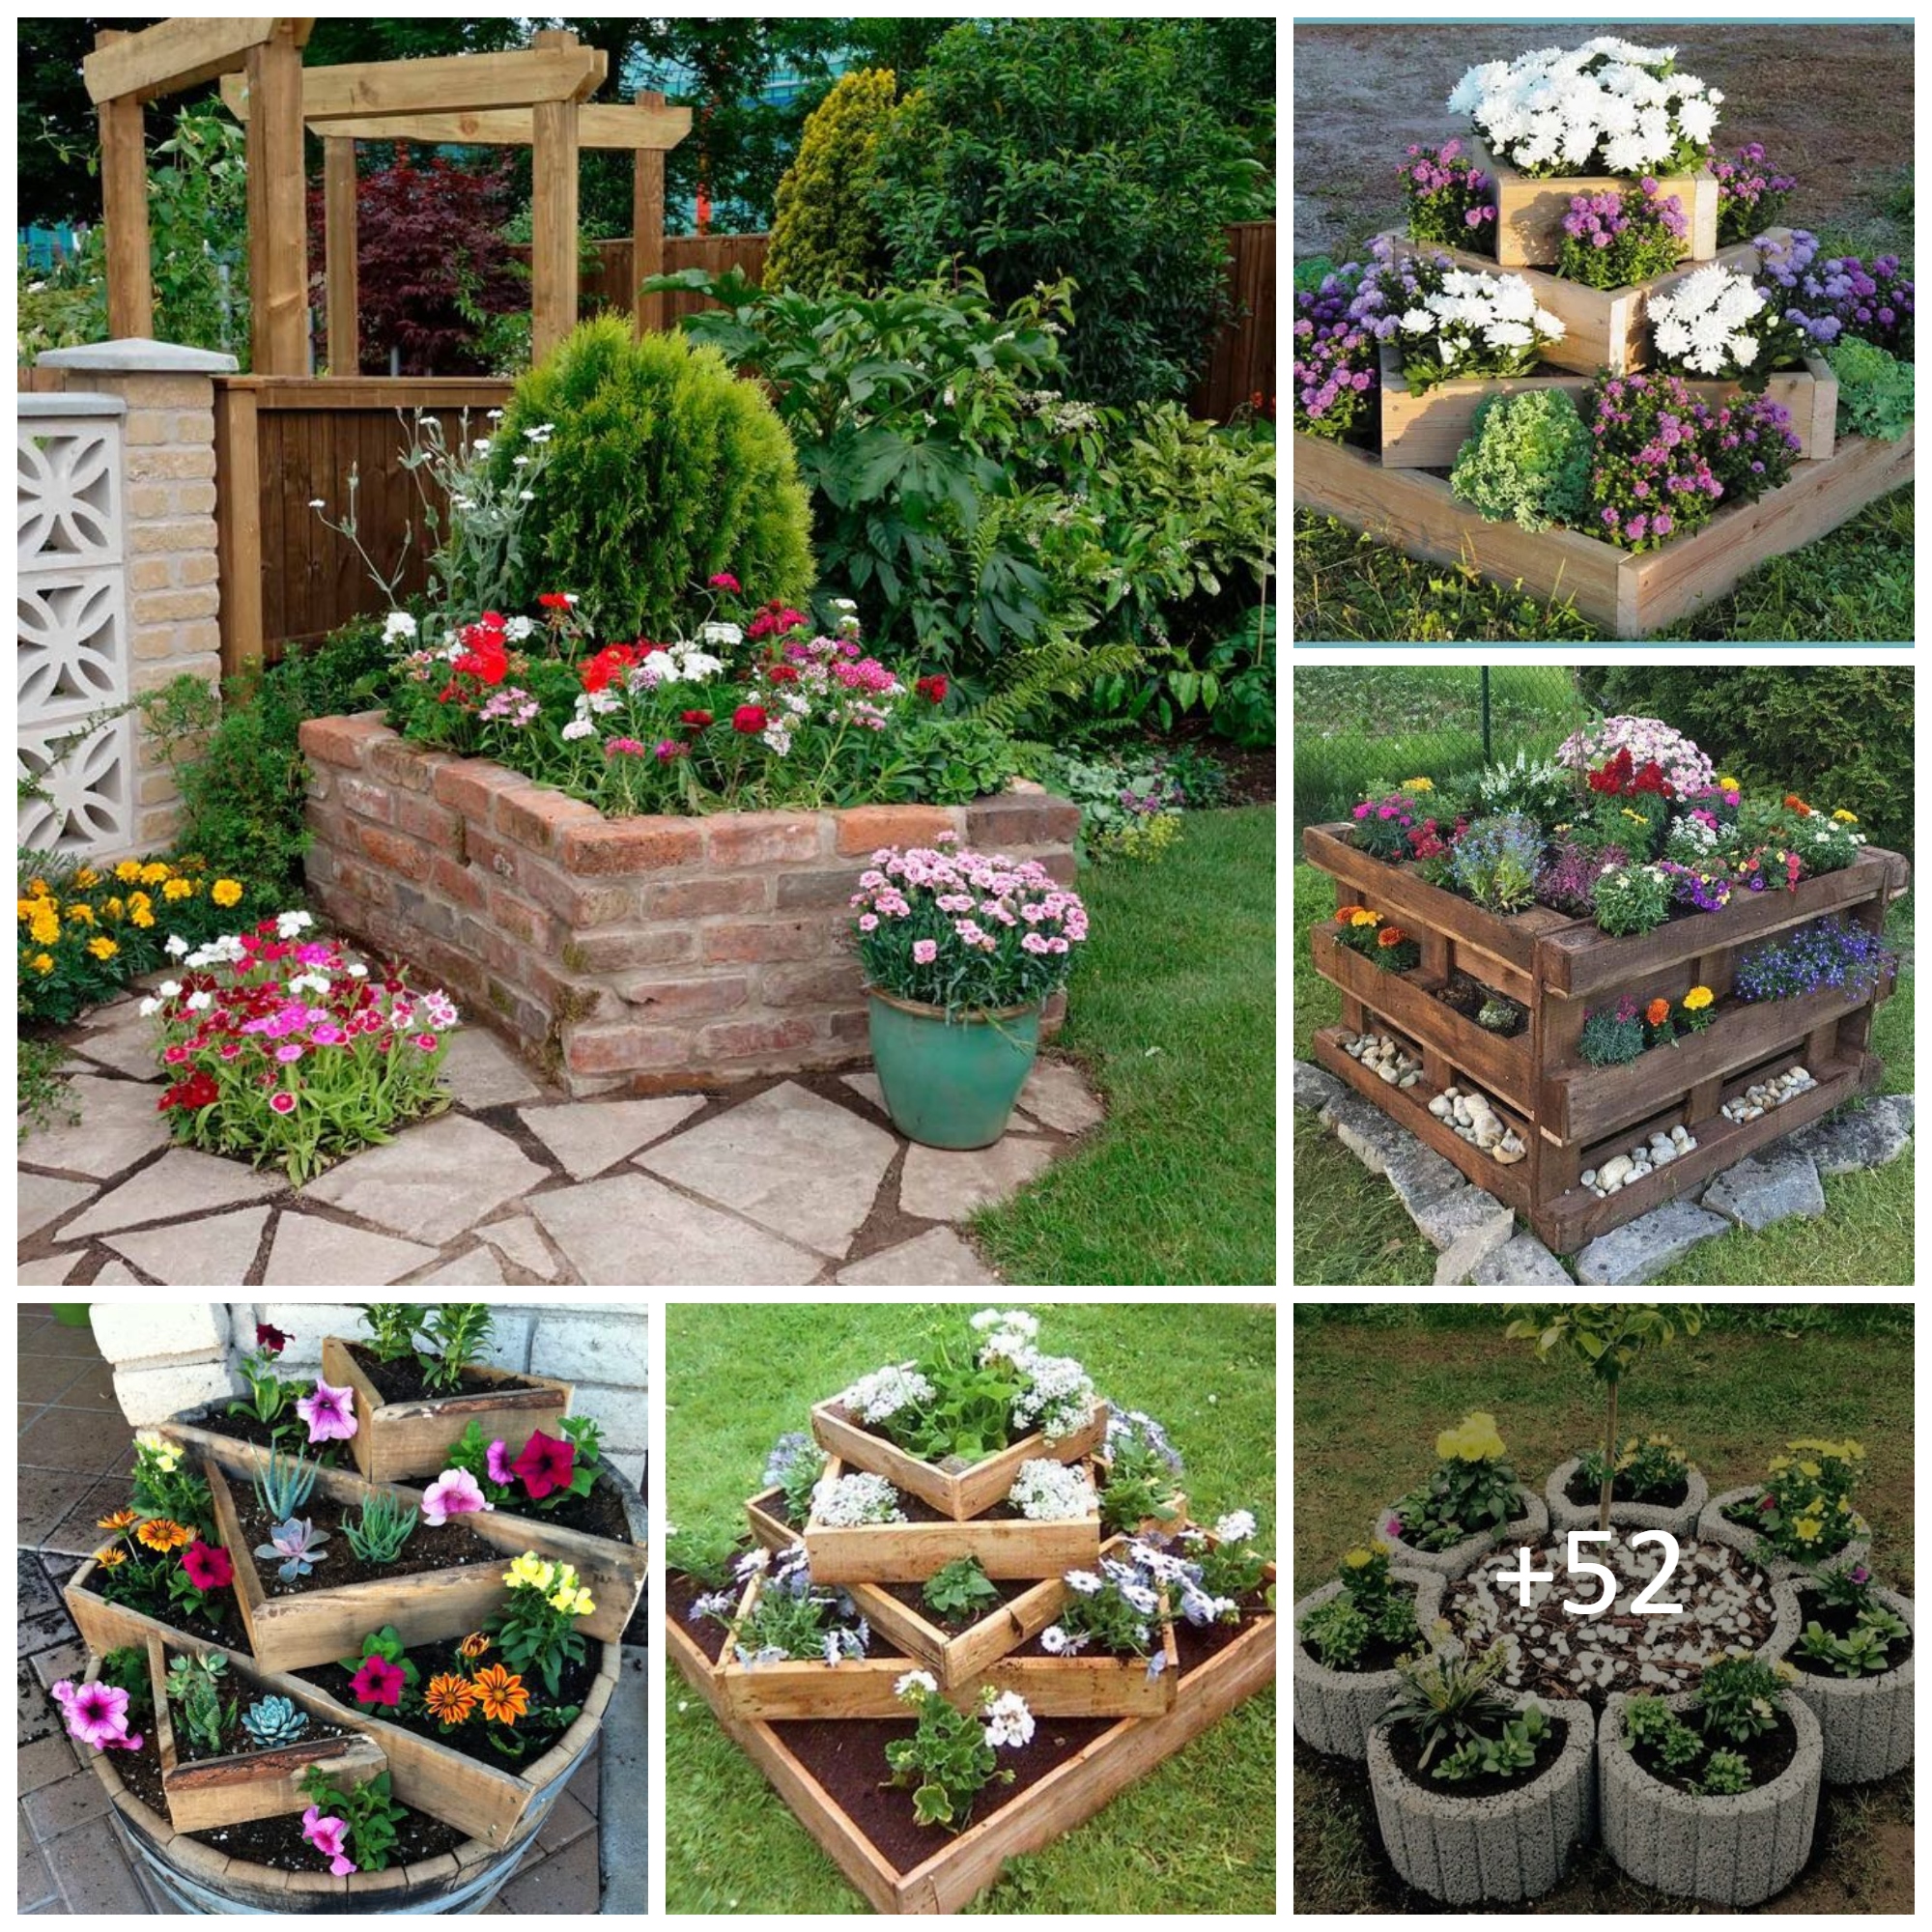 Best Raised Bed Ideas to Breathe New Life Into Your Garden